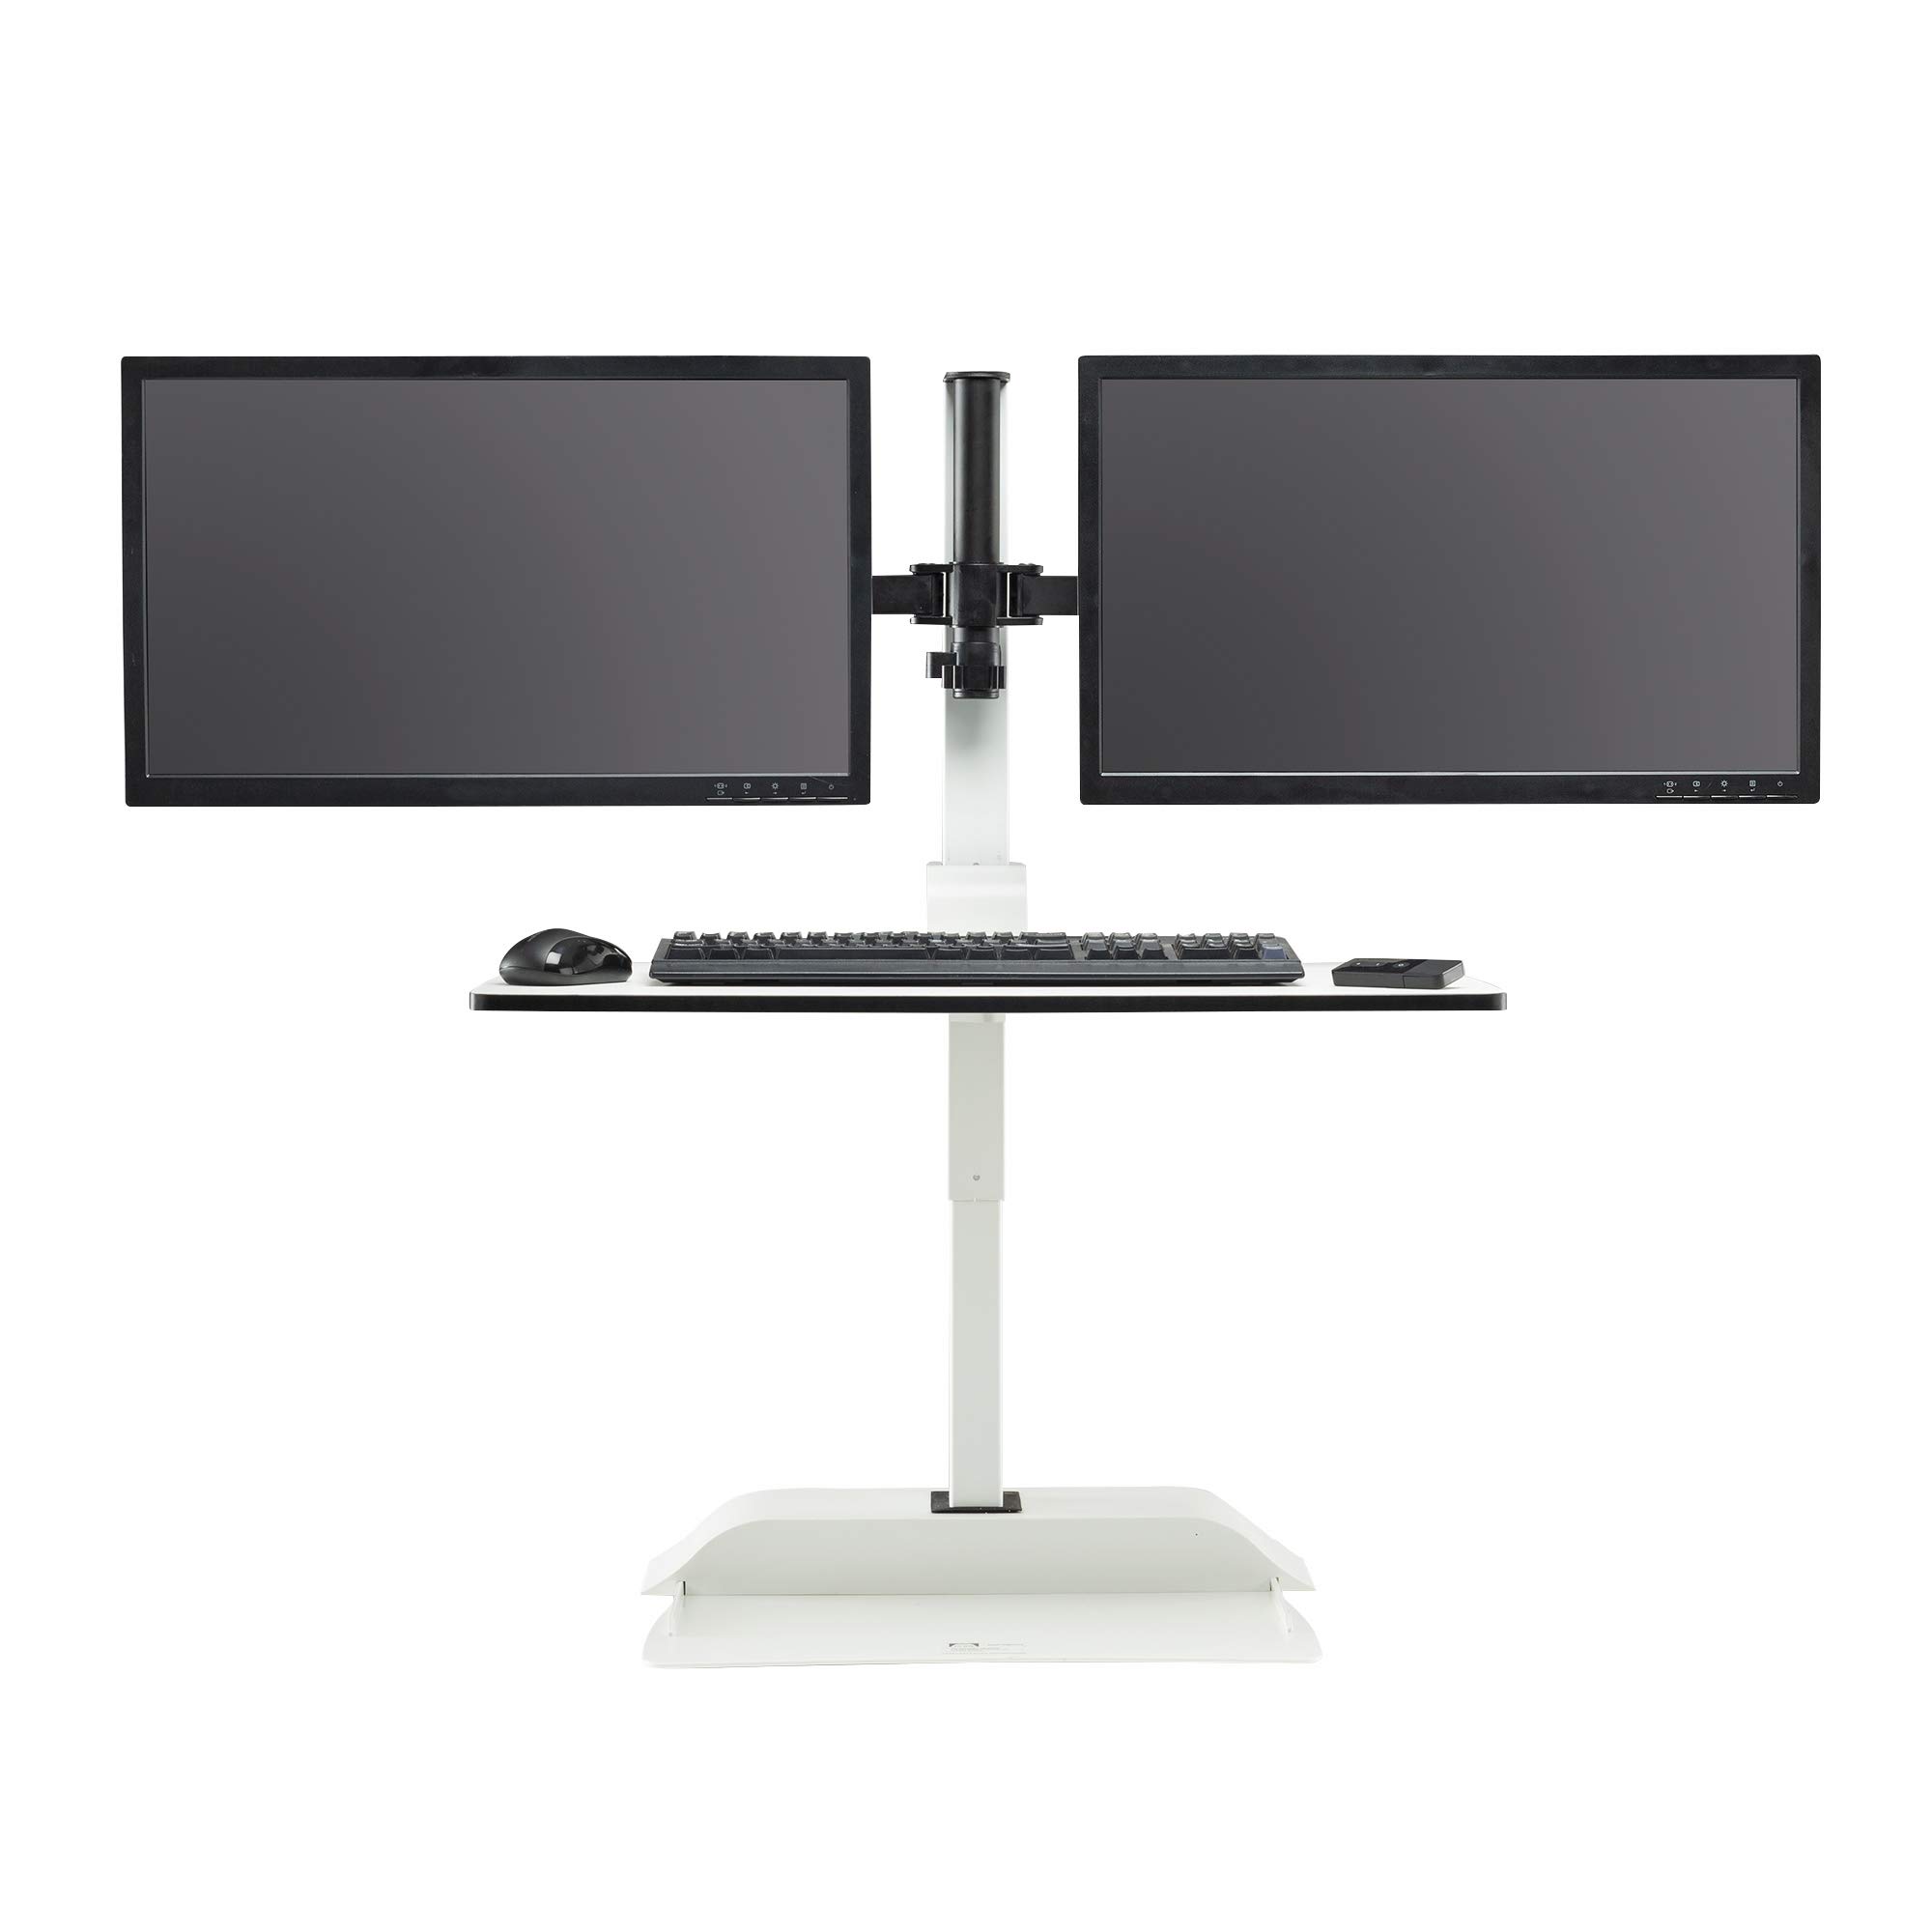 Safco Products 2193WH Soar by Safco Electric Sit, Stand Desk Converter, Dual Monitor Mount, White